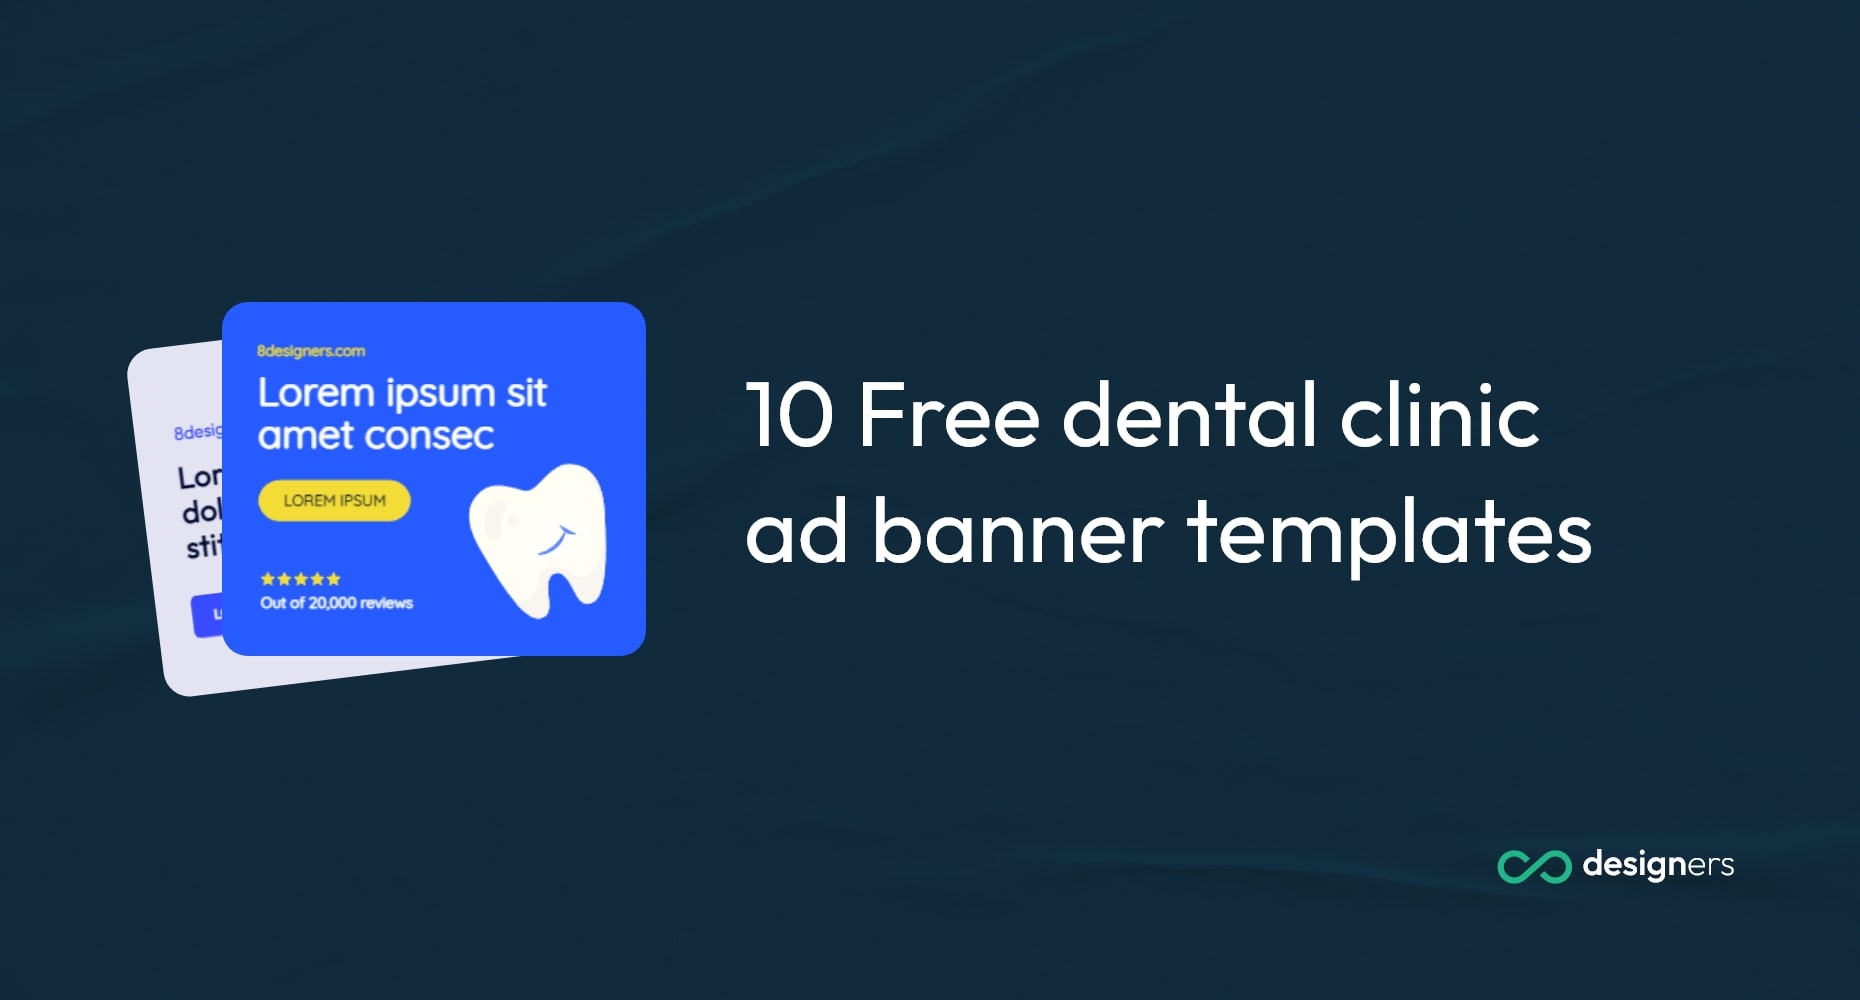 10 Free dental clinic ad banner templates | catchy dental ads